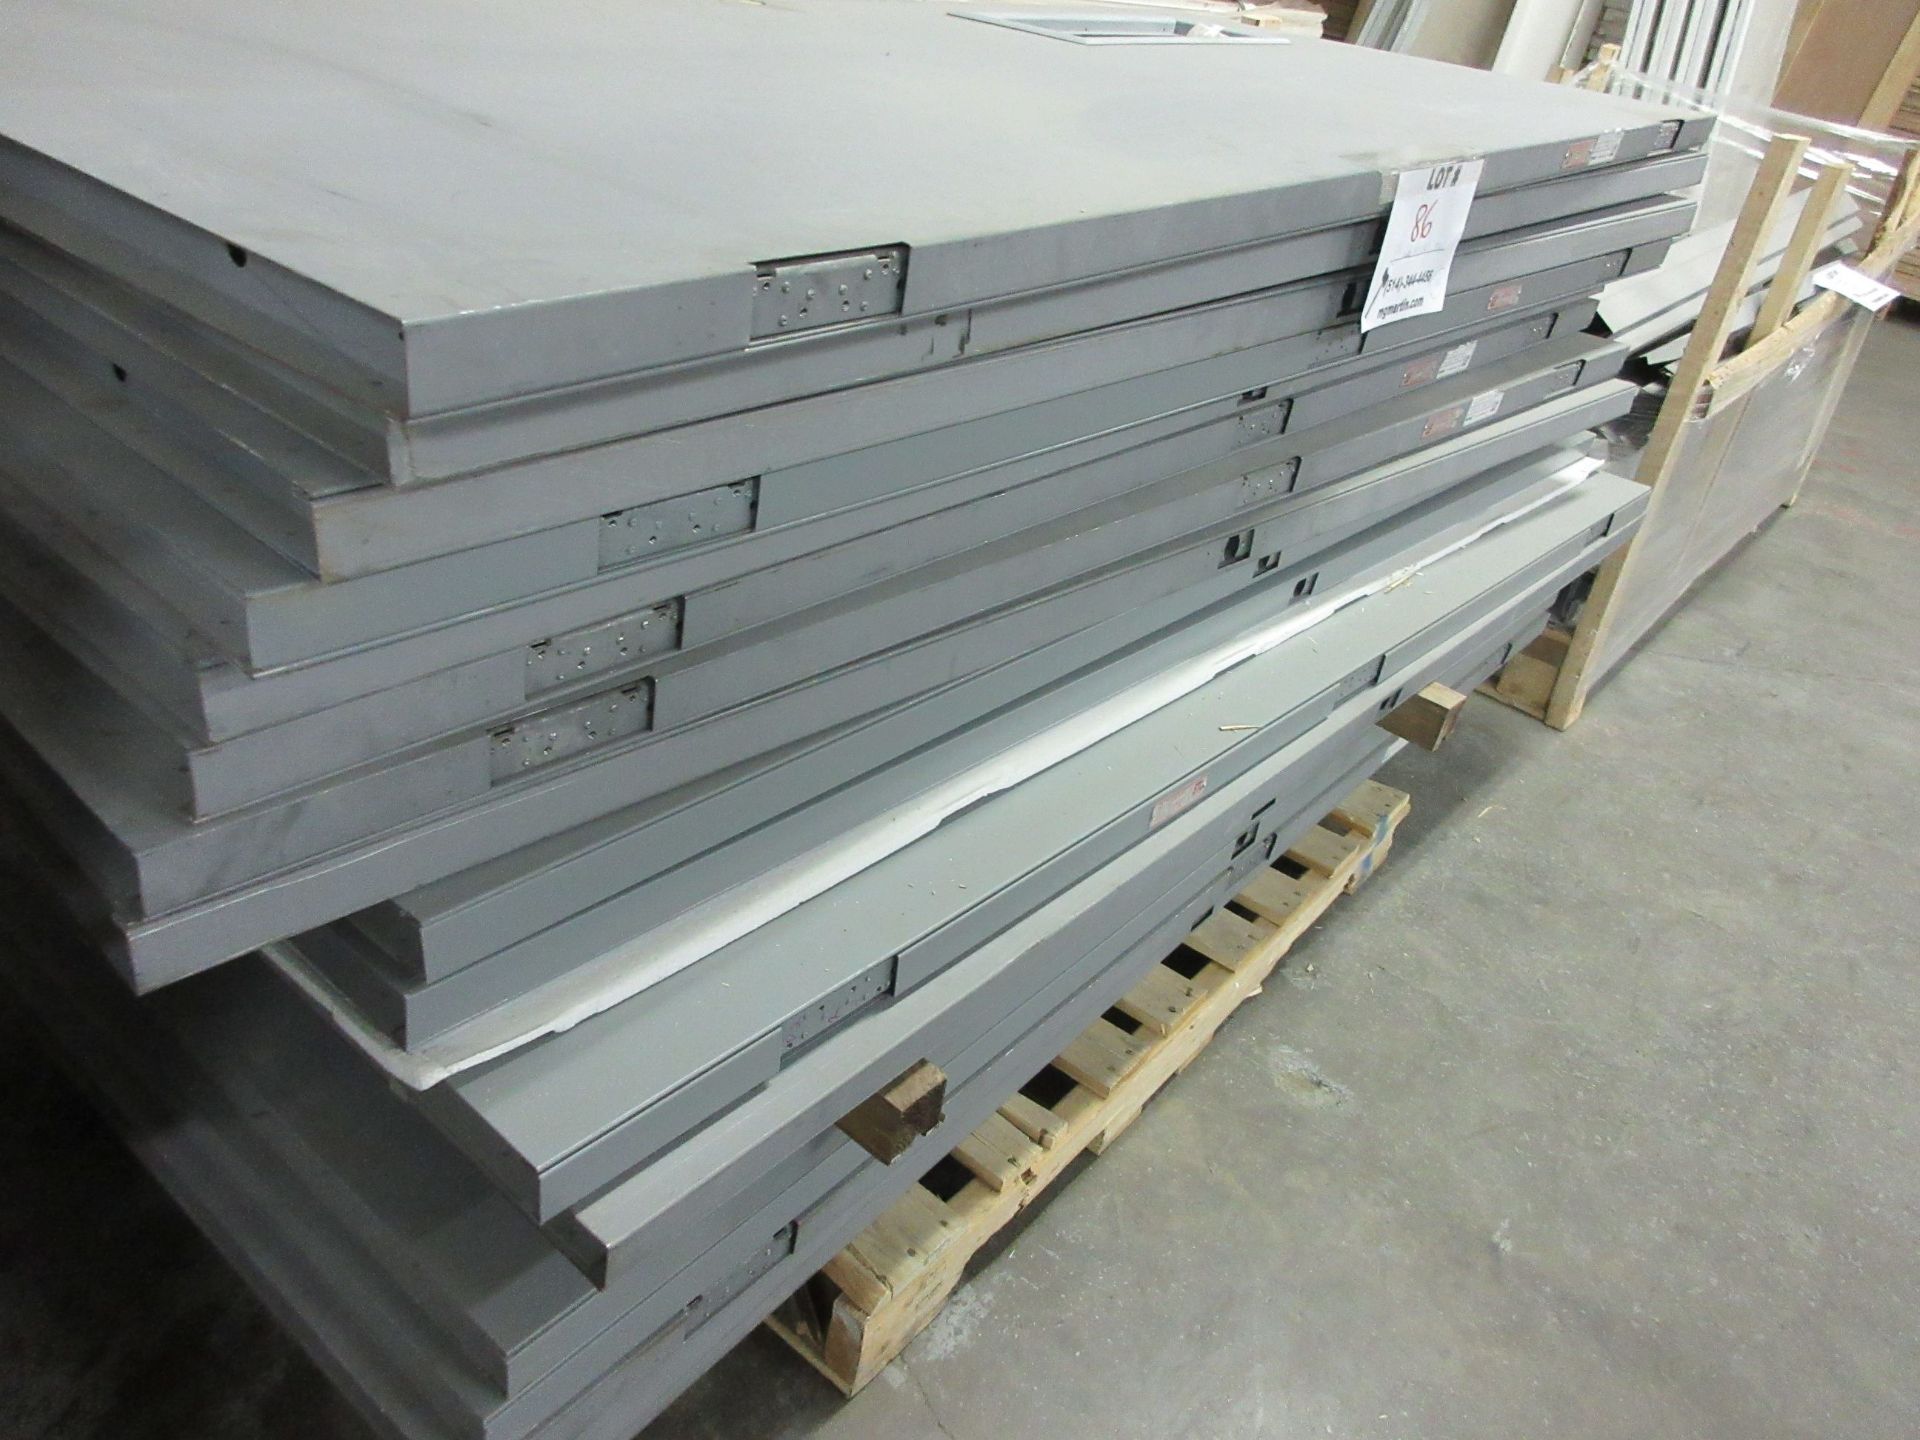 Assorted steel doors fire rated 45 to 90 min for most 34",36" x 83" x 1 3/4" (qty 17) - Image 4 of 4